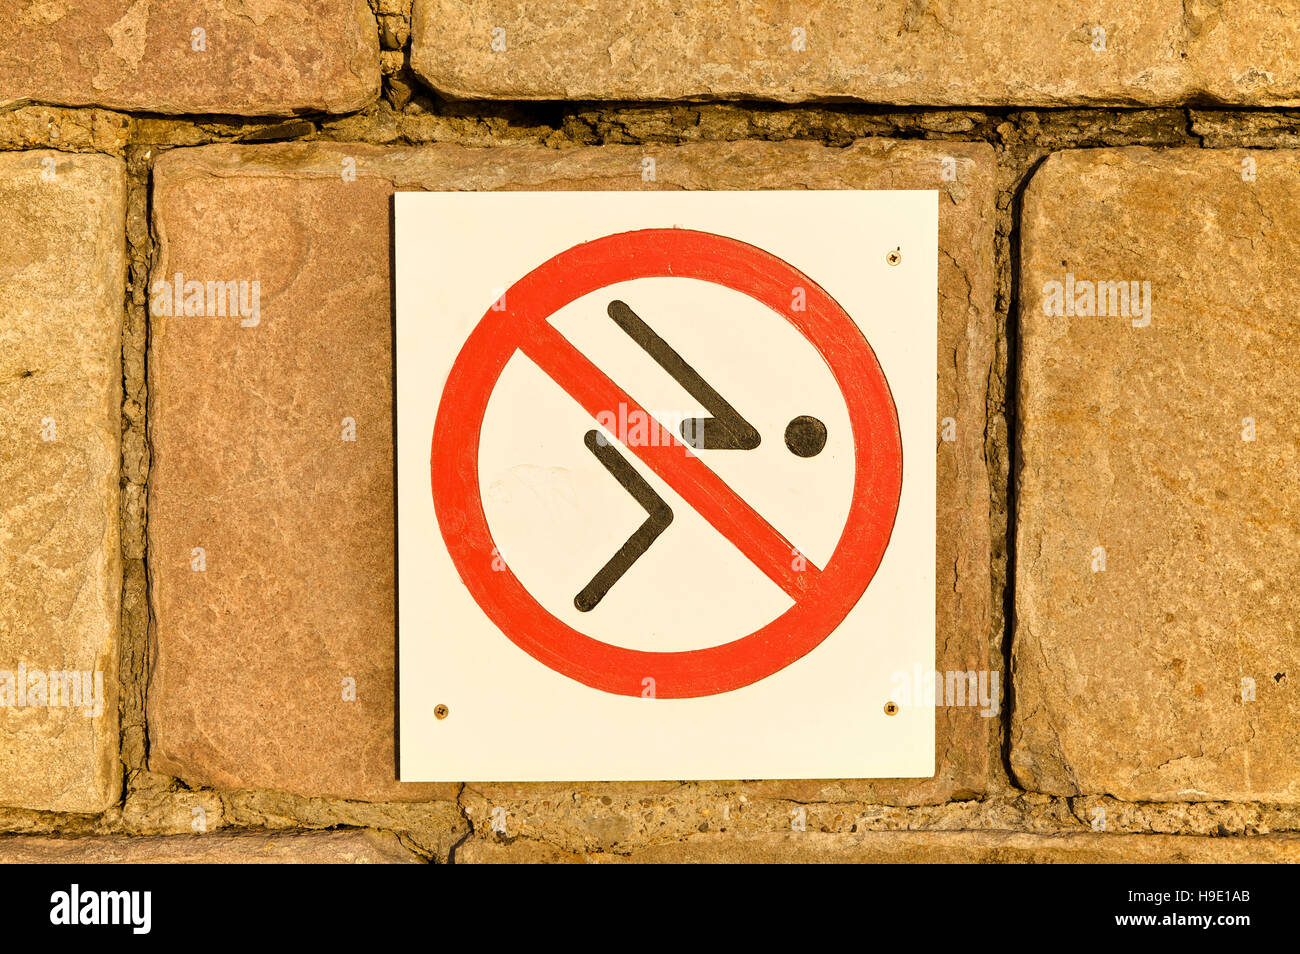 No diving, sign Stock Photo